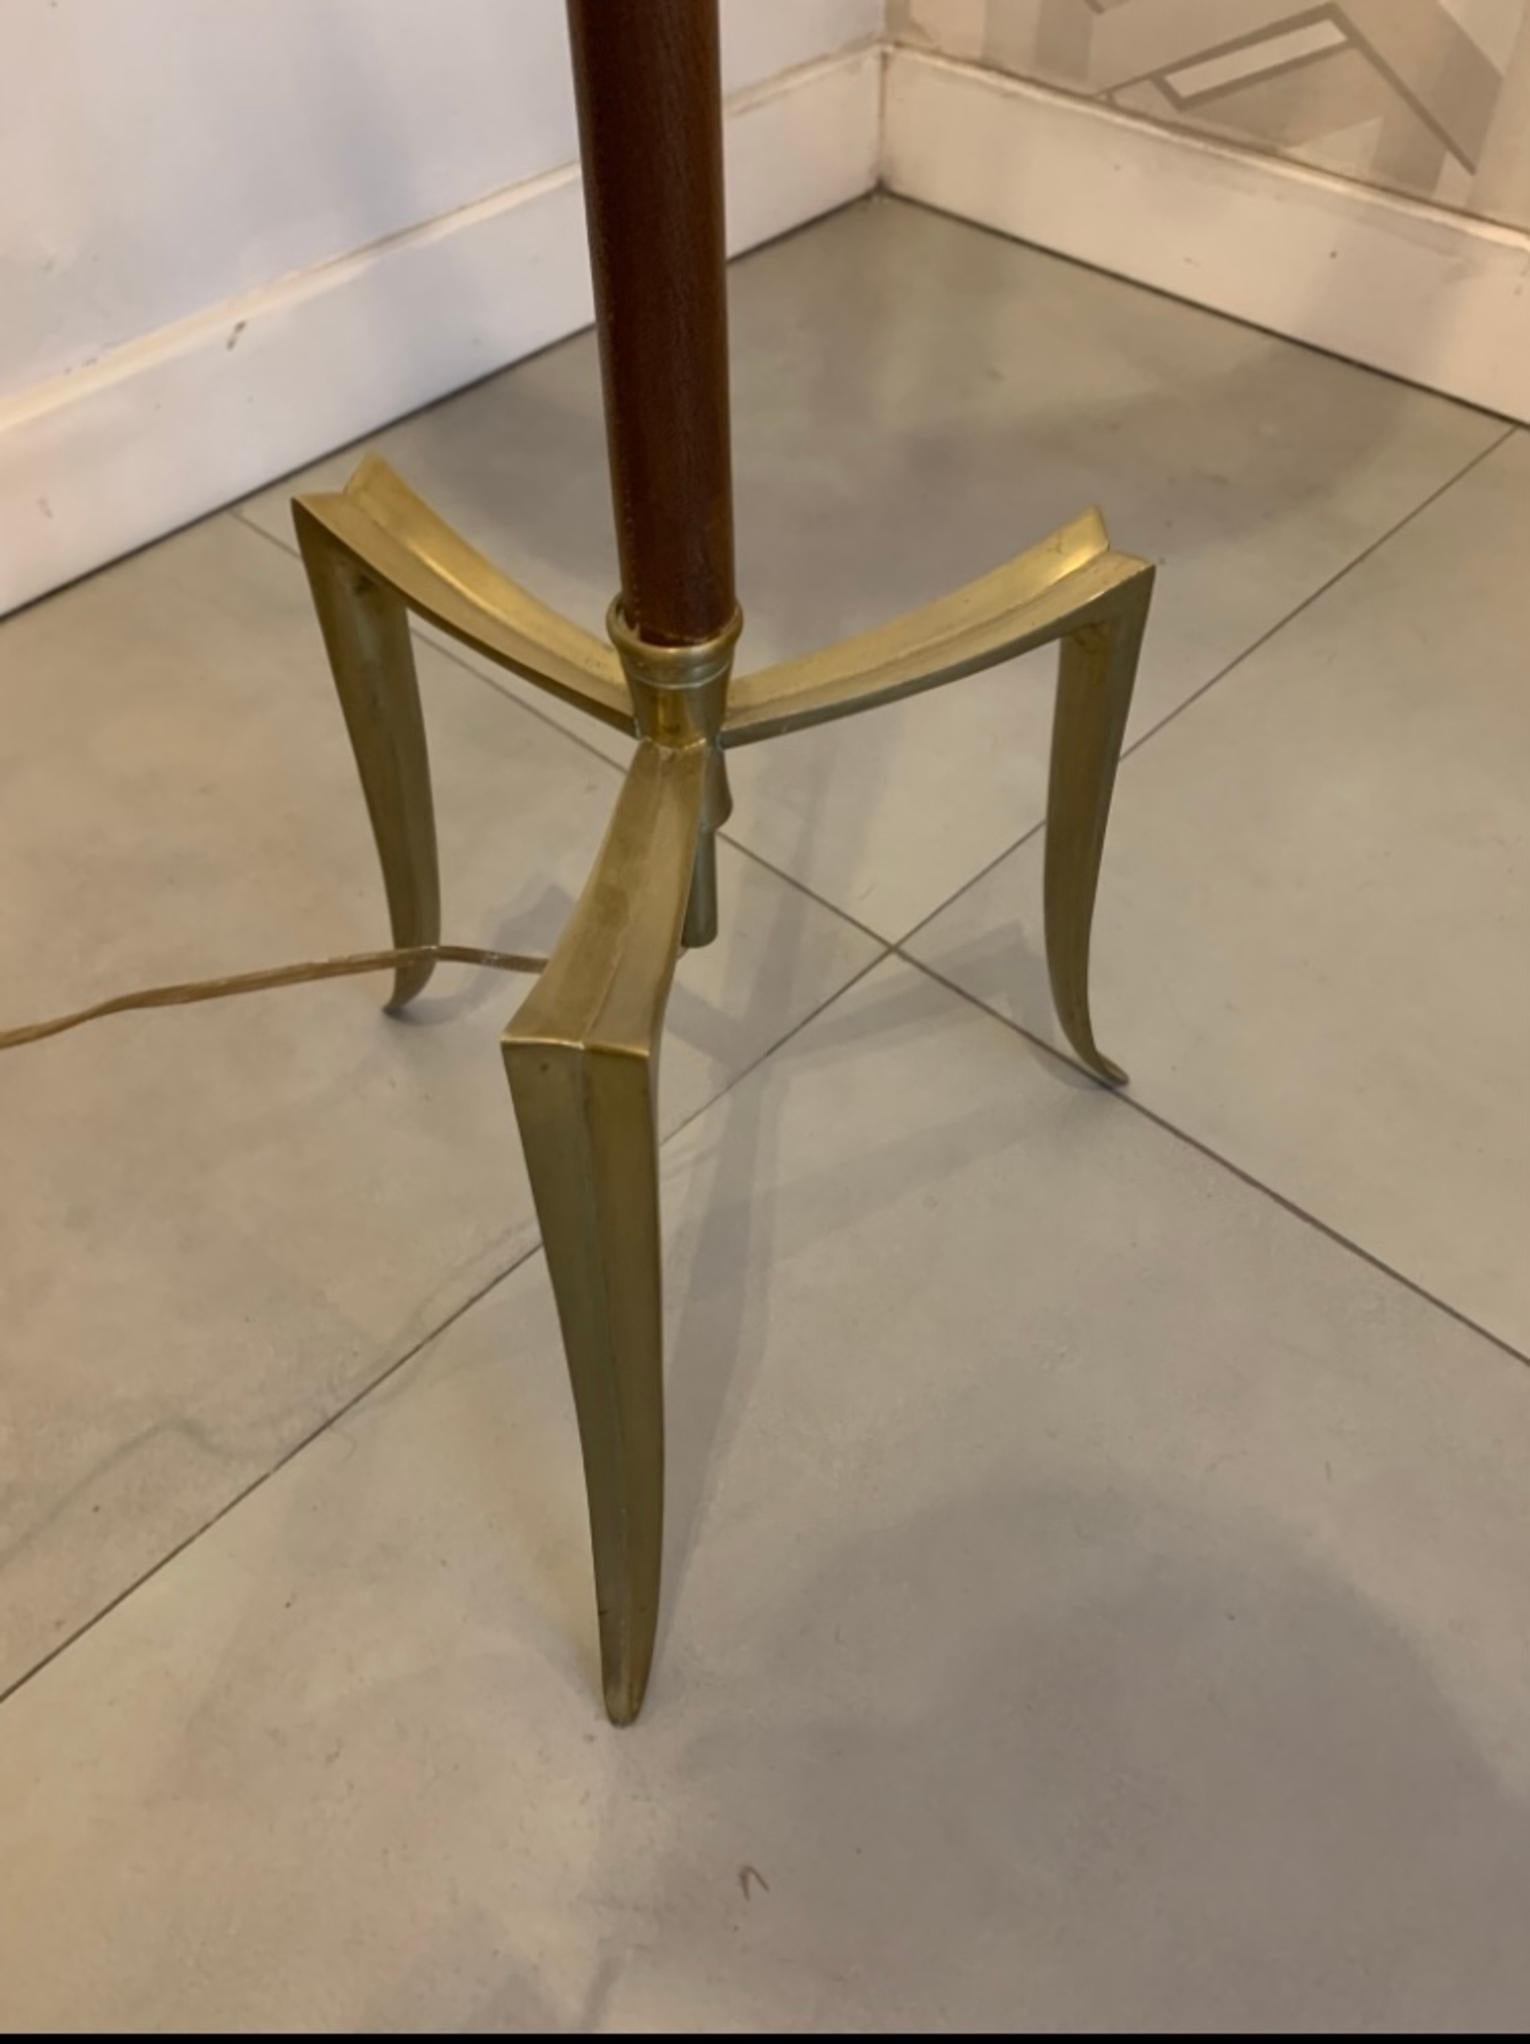 An elegant and unusual French floor lamp, made of bronze, on the lower legs in the form of a tripod, the central column of the lamp is in leather, and brass, and ends in a spear point ornament.
The lampshade is modern, with measurements that are 45